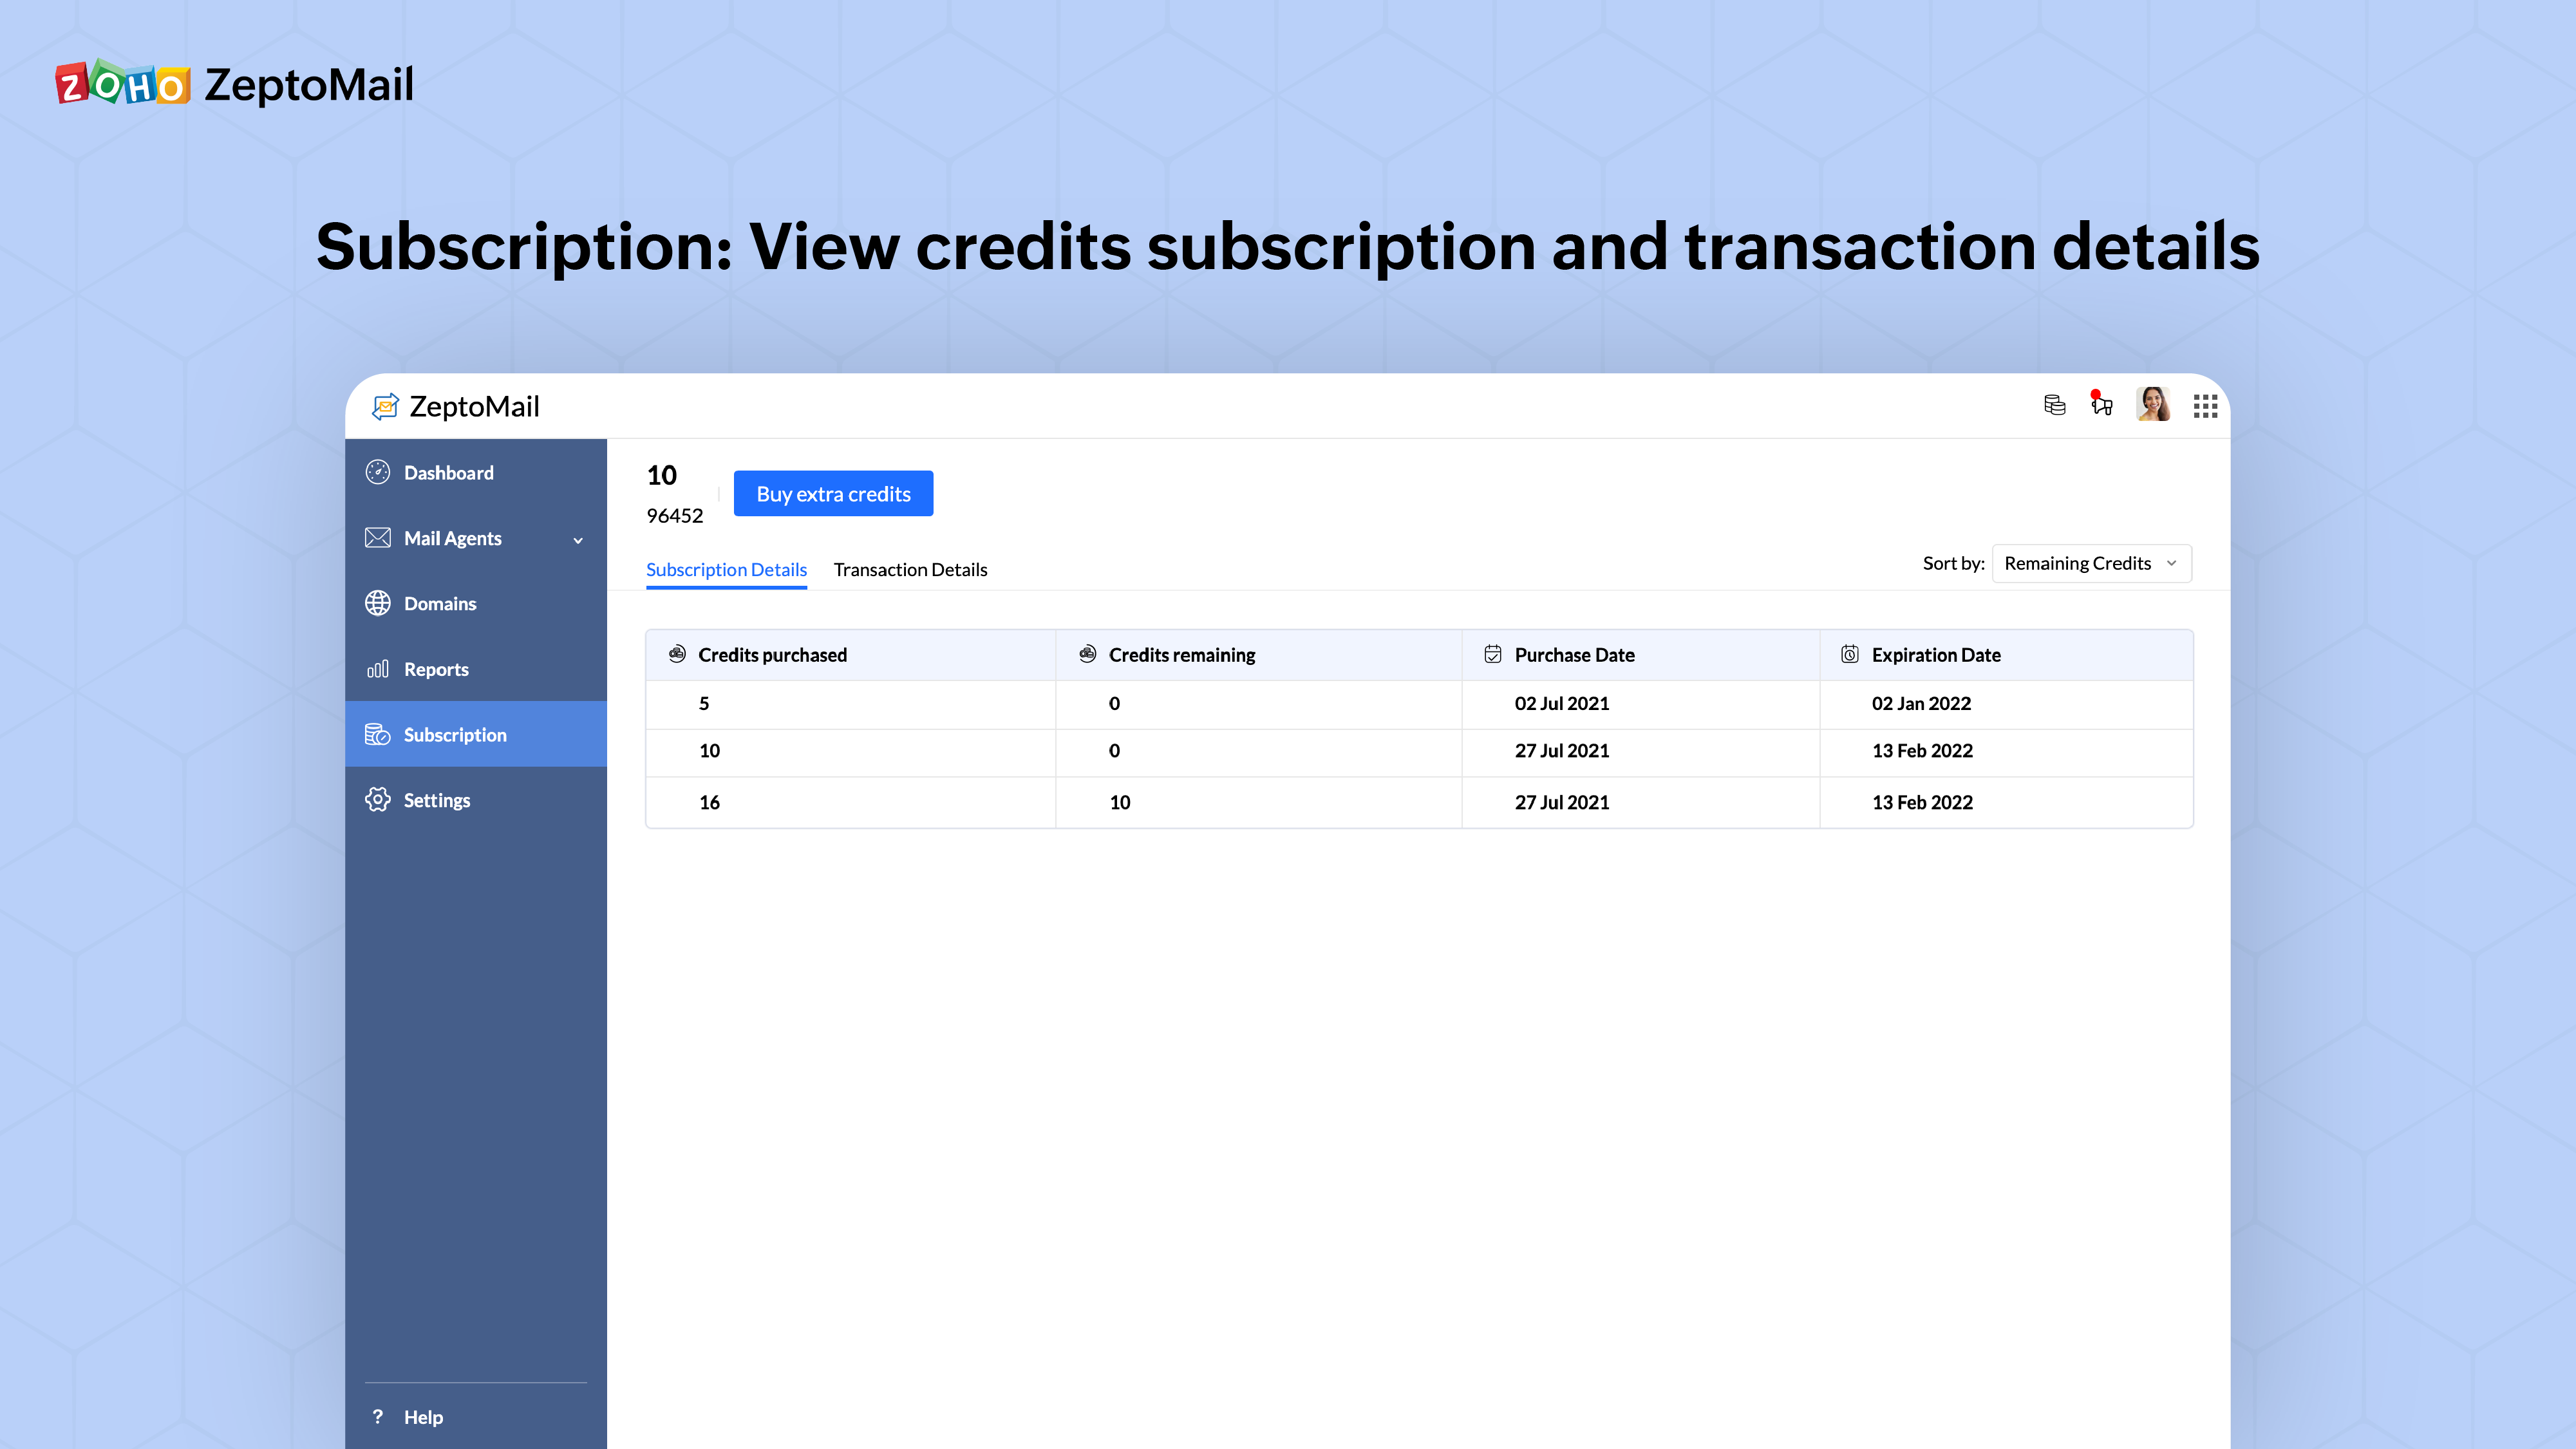 Subscription: View credits subscription and transaction details